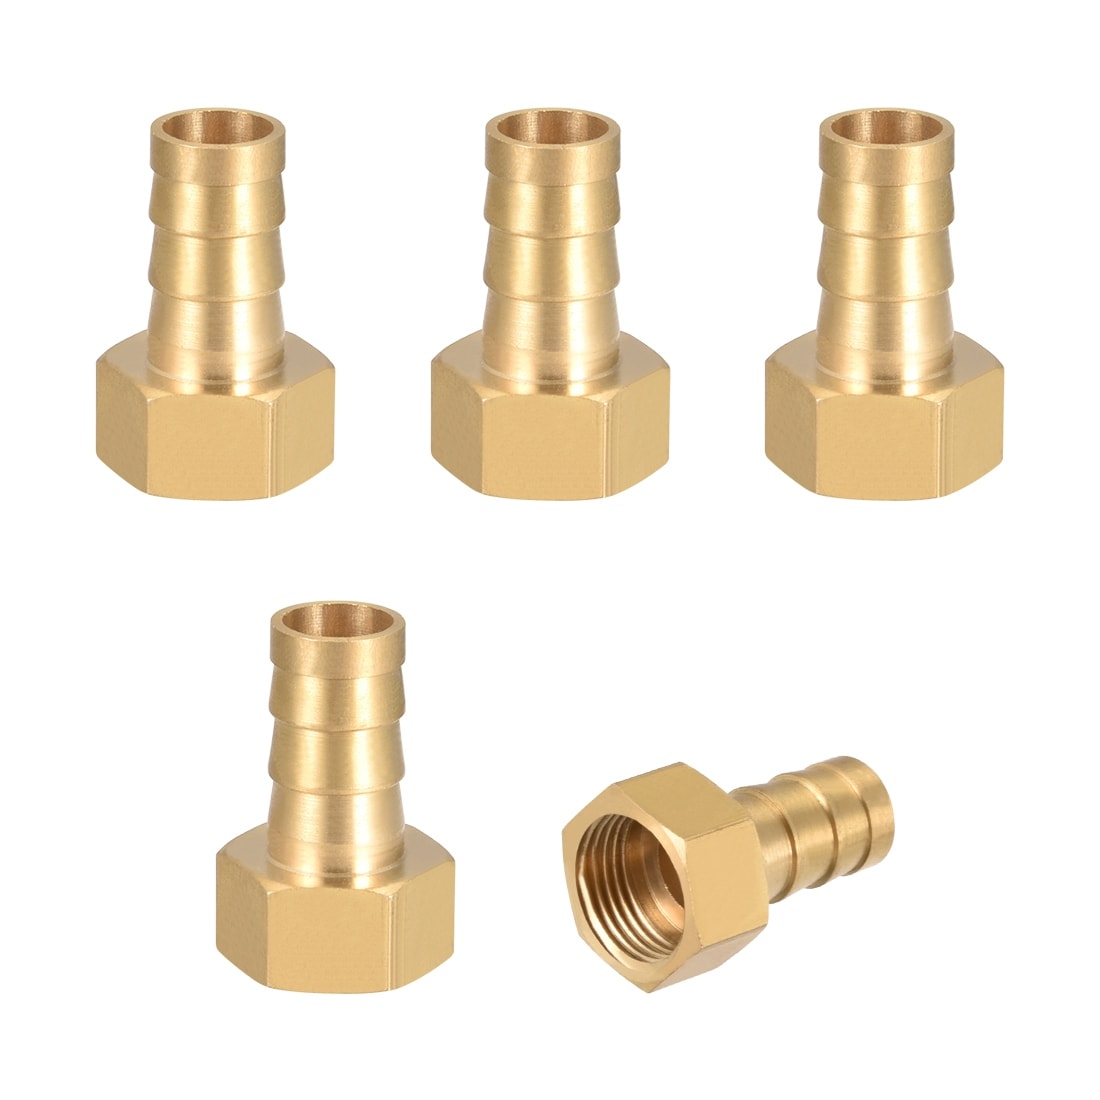 5PCS Tube OD 6mm-1/4" BSP Female Pneumatic Connector Push In To Connect Fitting 